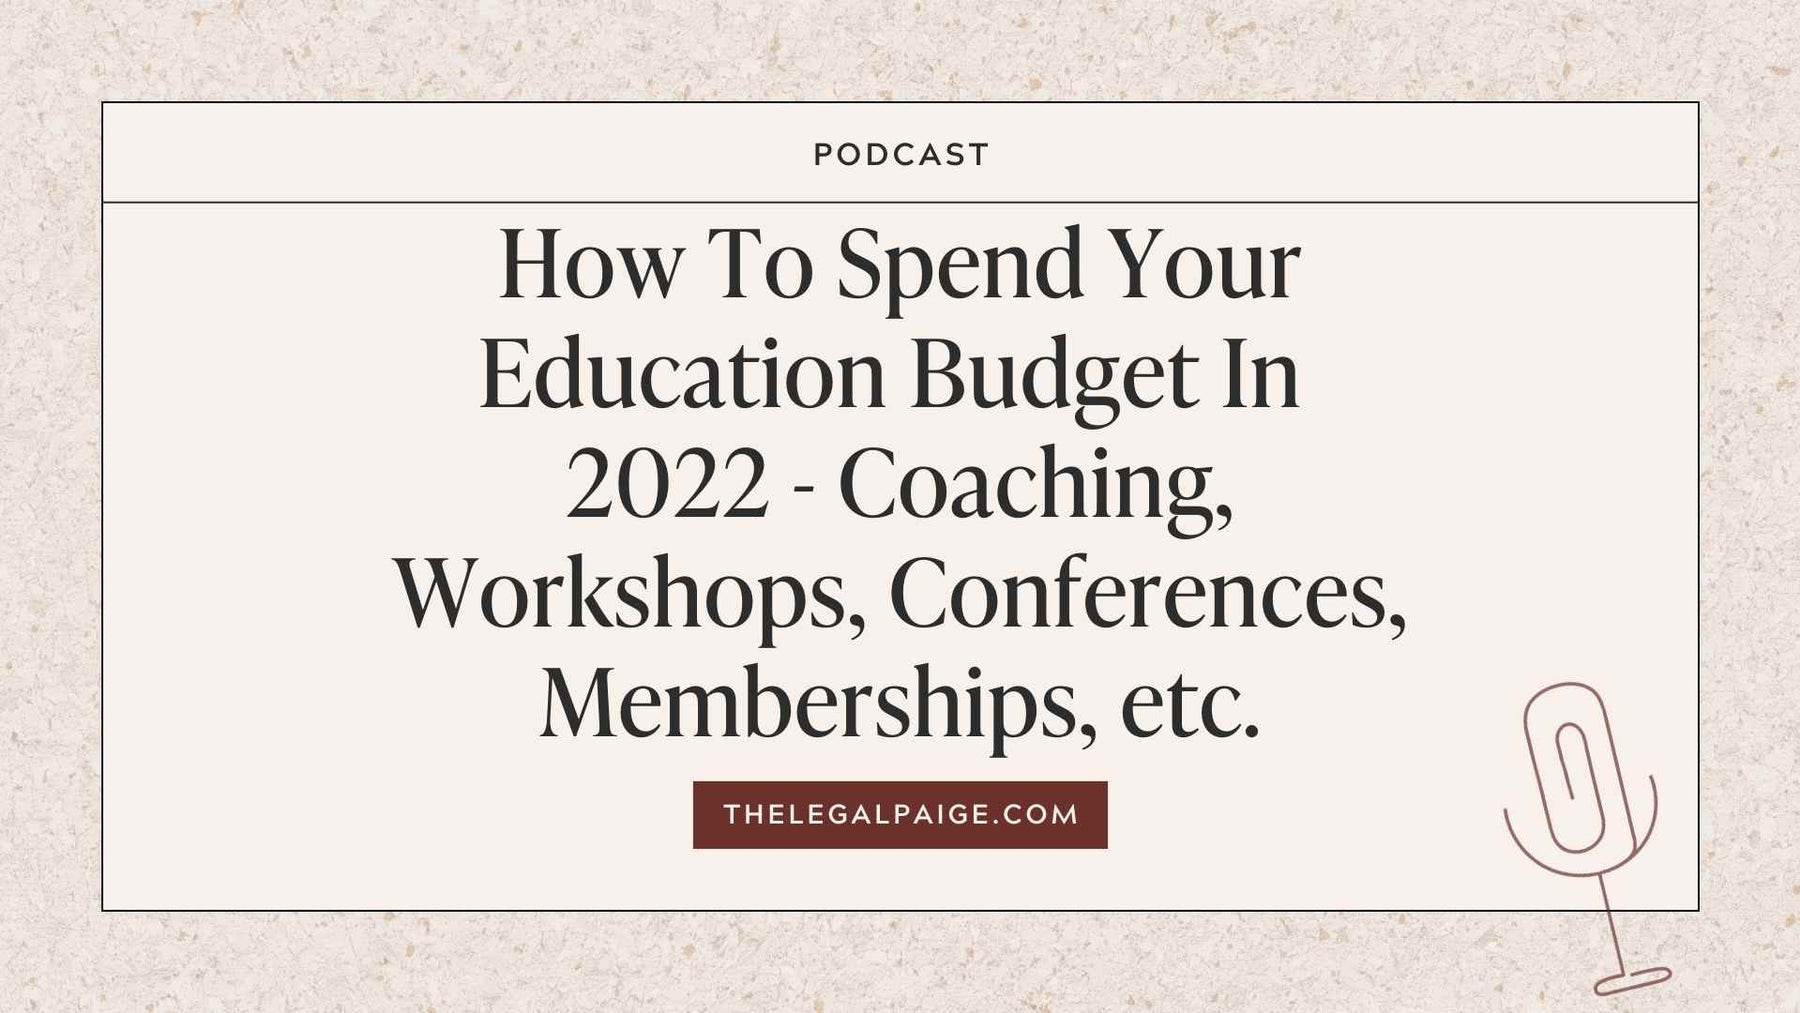 How to spend your education budget in 2022 - coaching, workshops, conferences, memberships, etc.